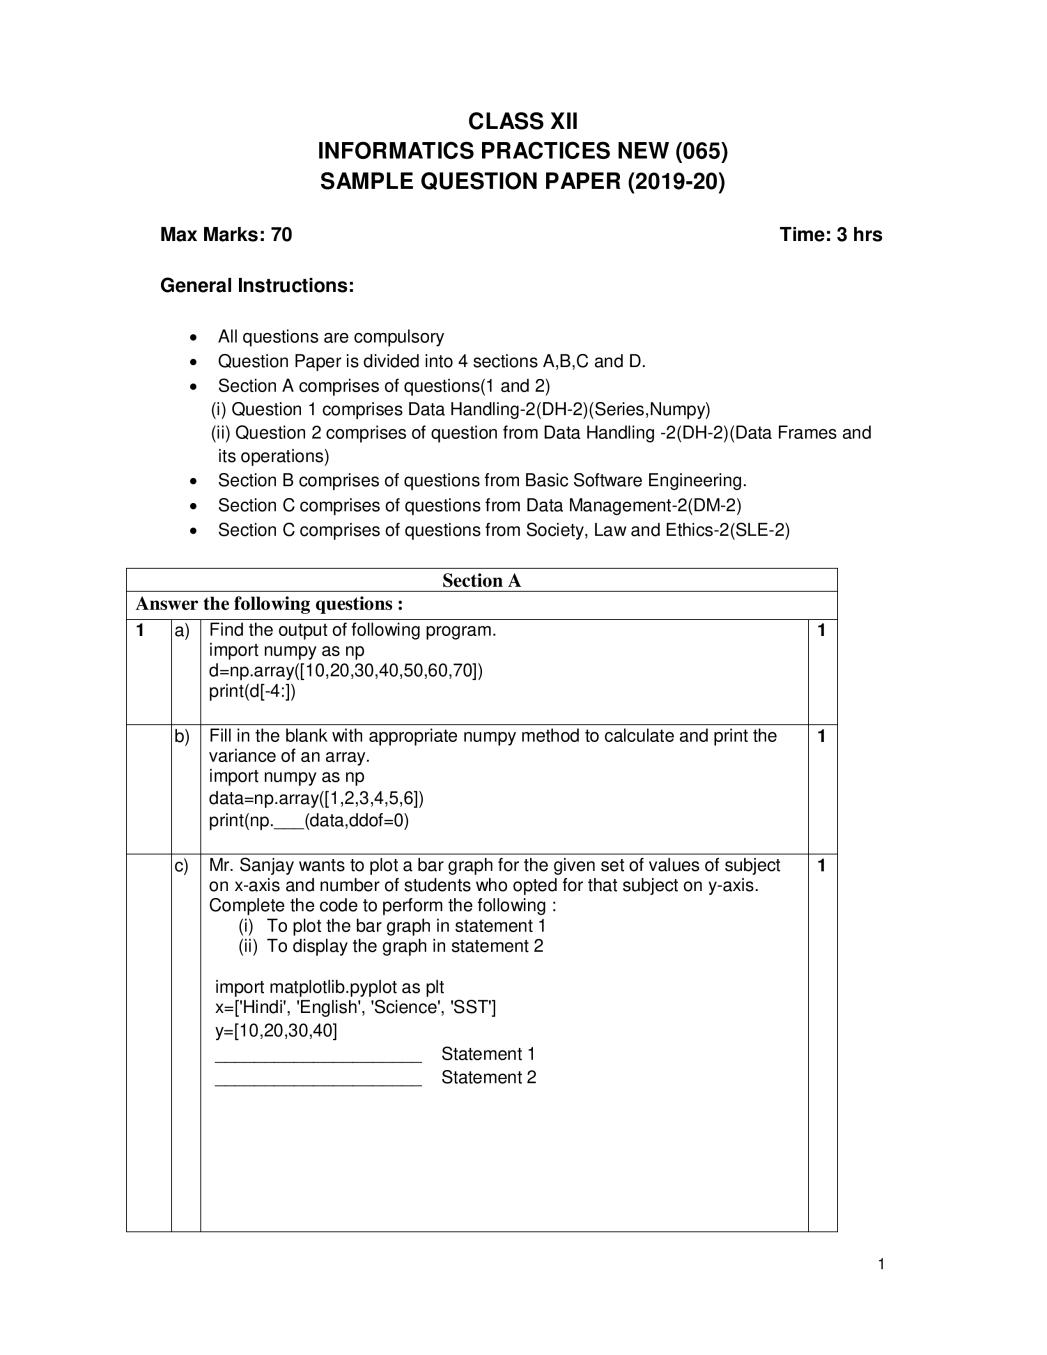 CBSE Class 12 Sample Paper 2020 for Informatics Practices New - Page 1